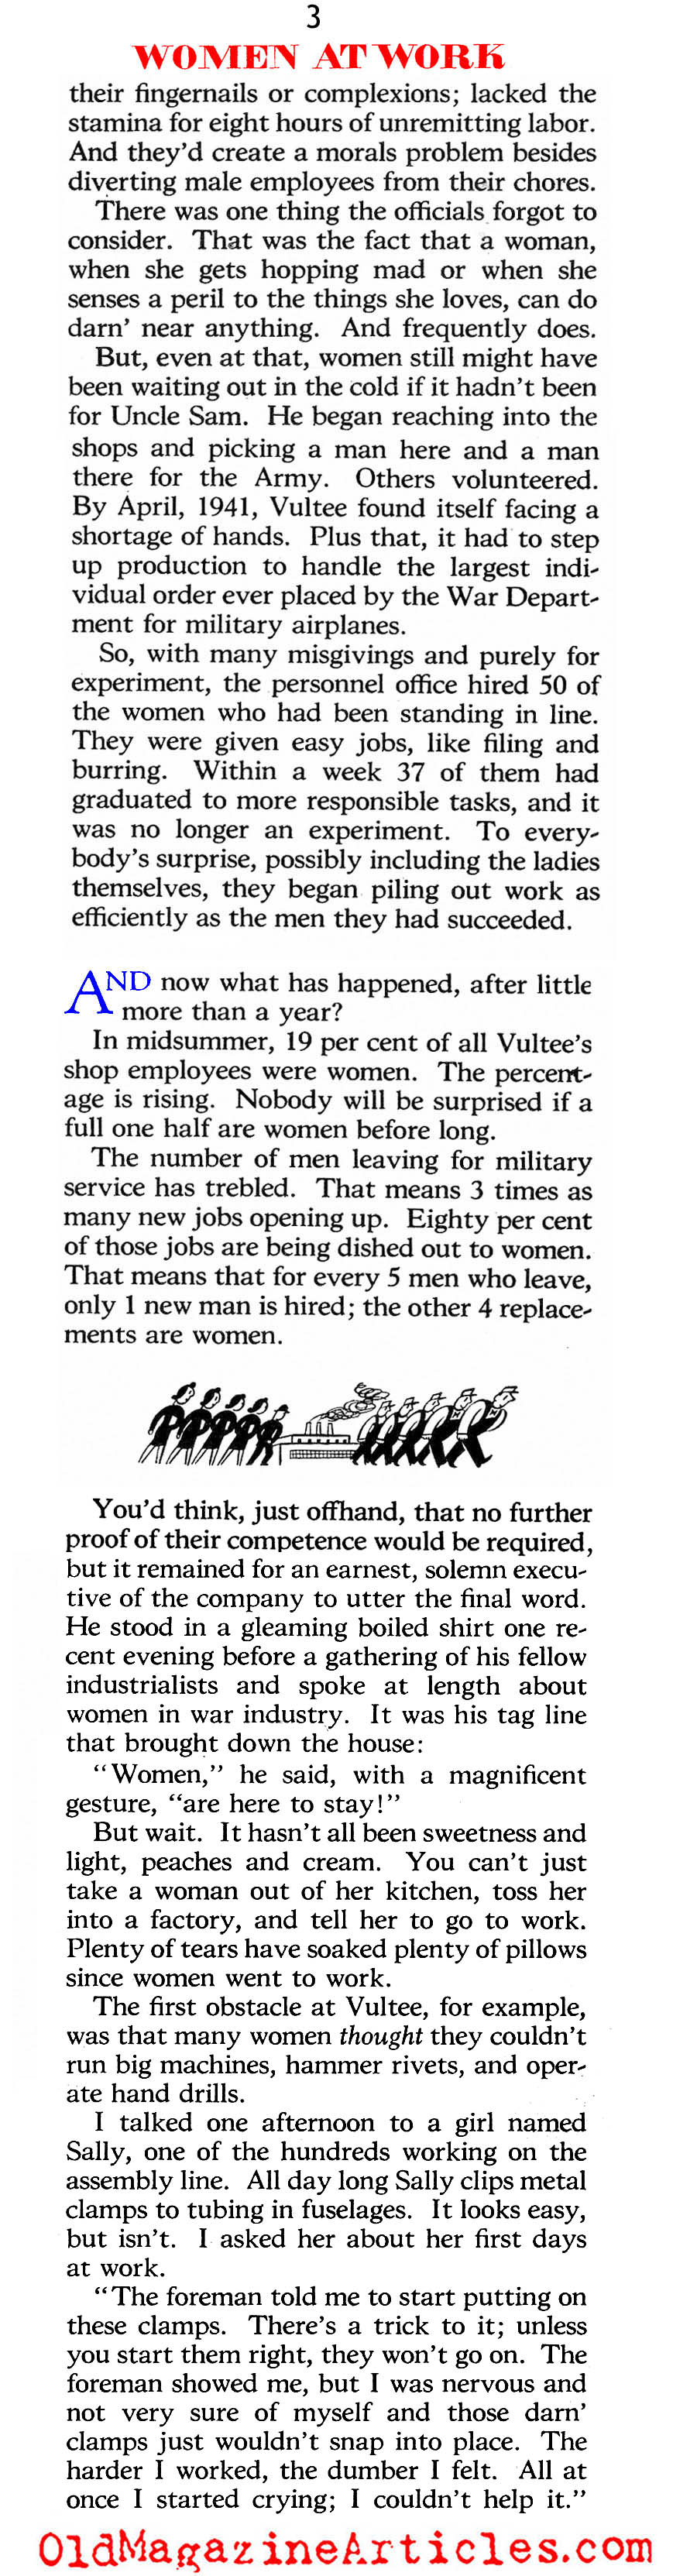 Women Working for the War (The American Magazine, 1942)